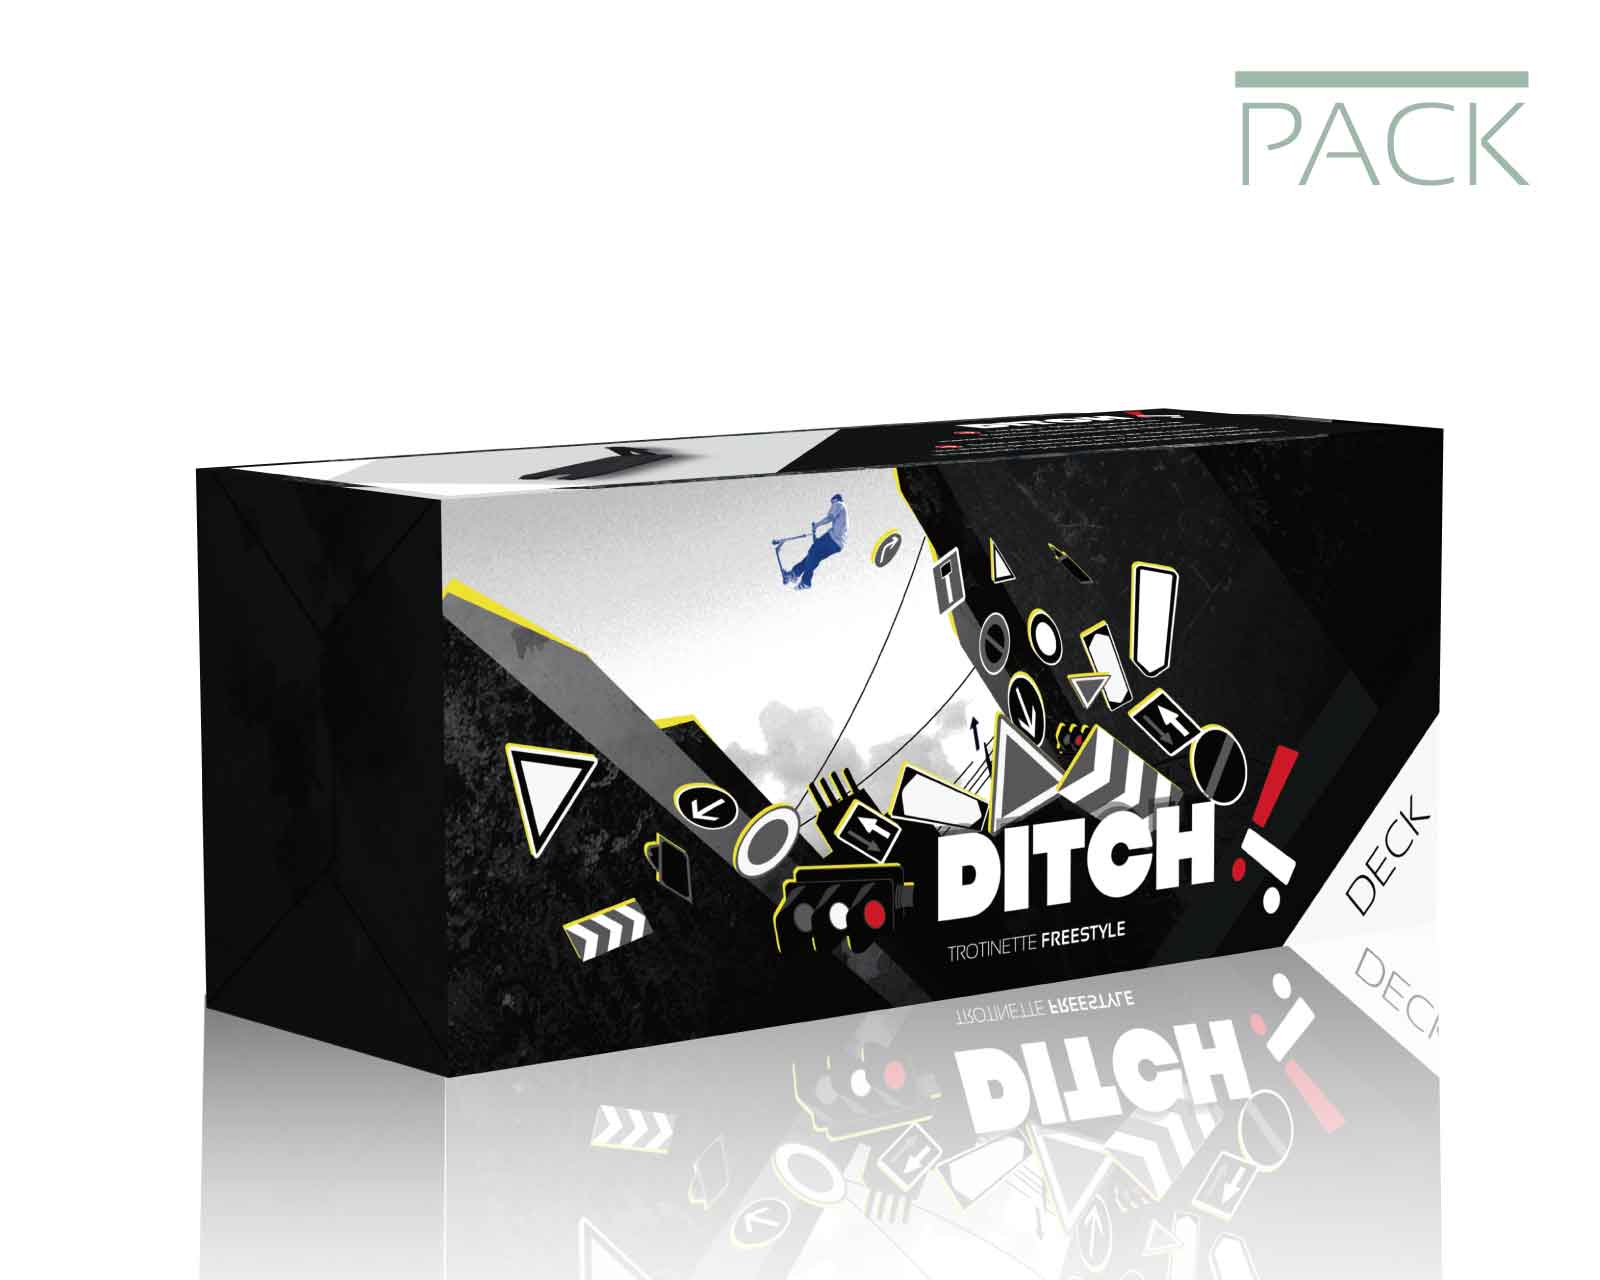 Packaging for a school assignment handled over by the actual freestyle scooter brand "Ditch".